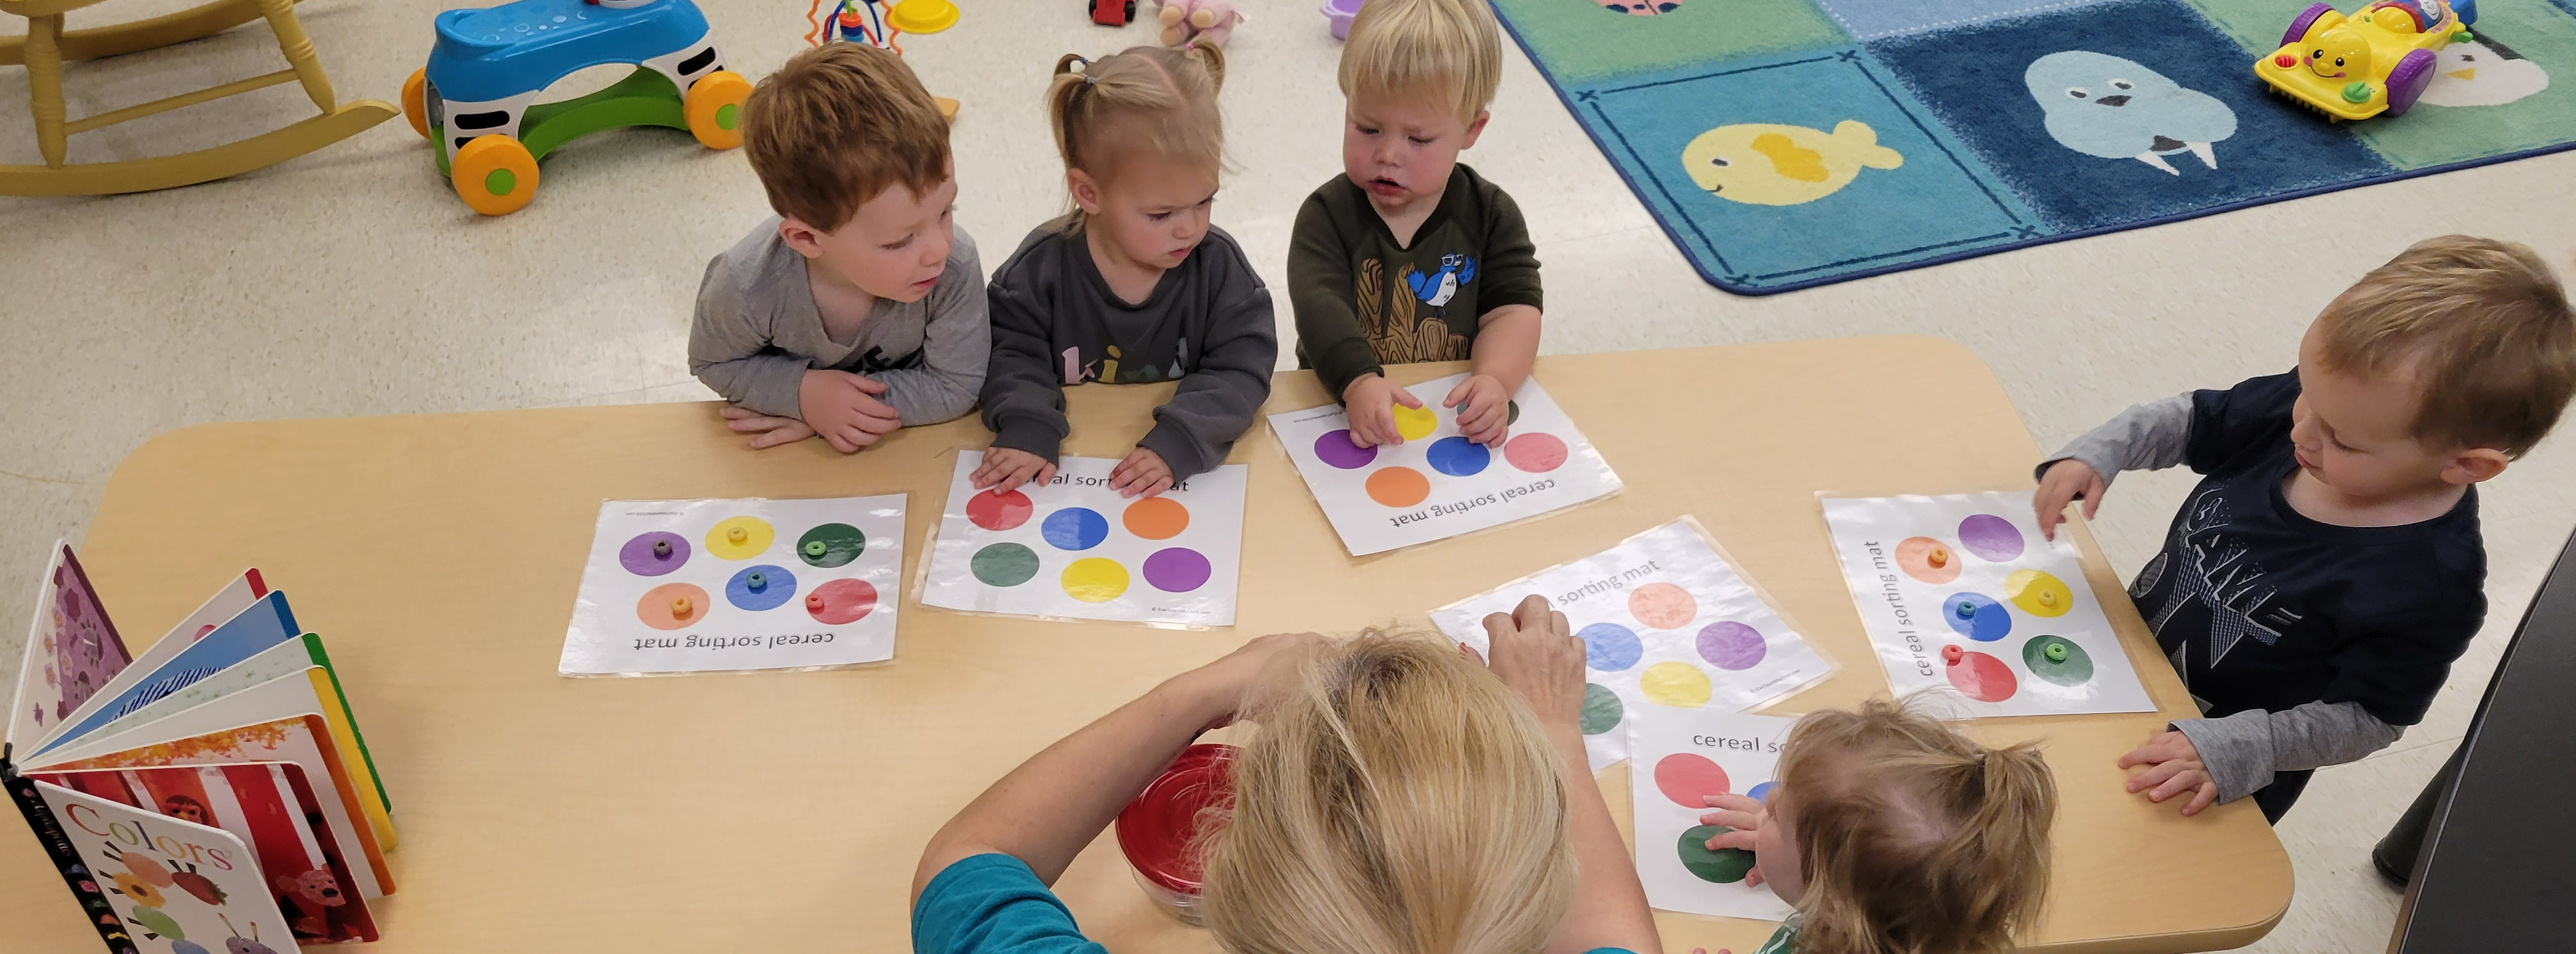 The toddlers are working hard on their colors.